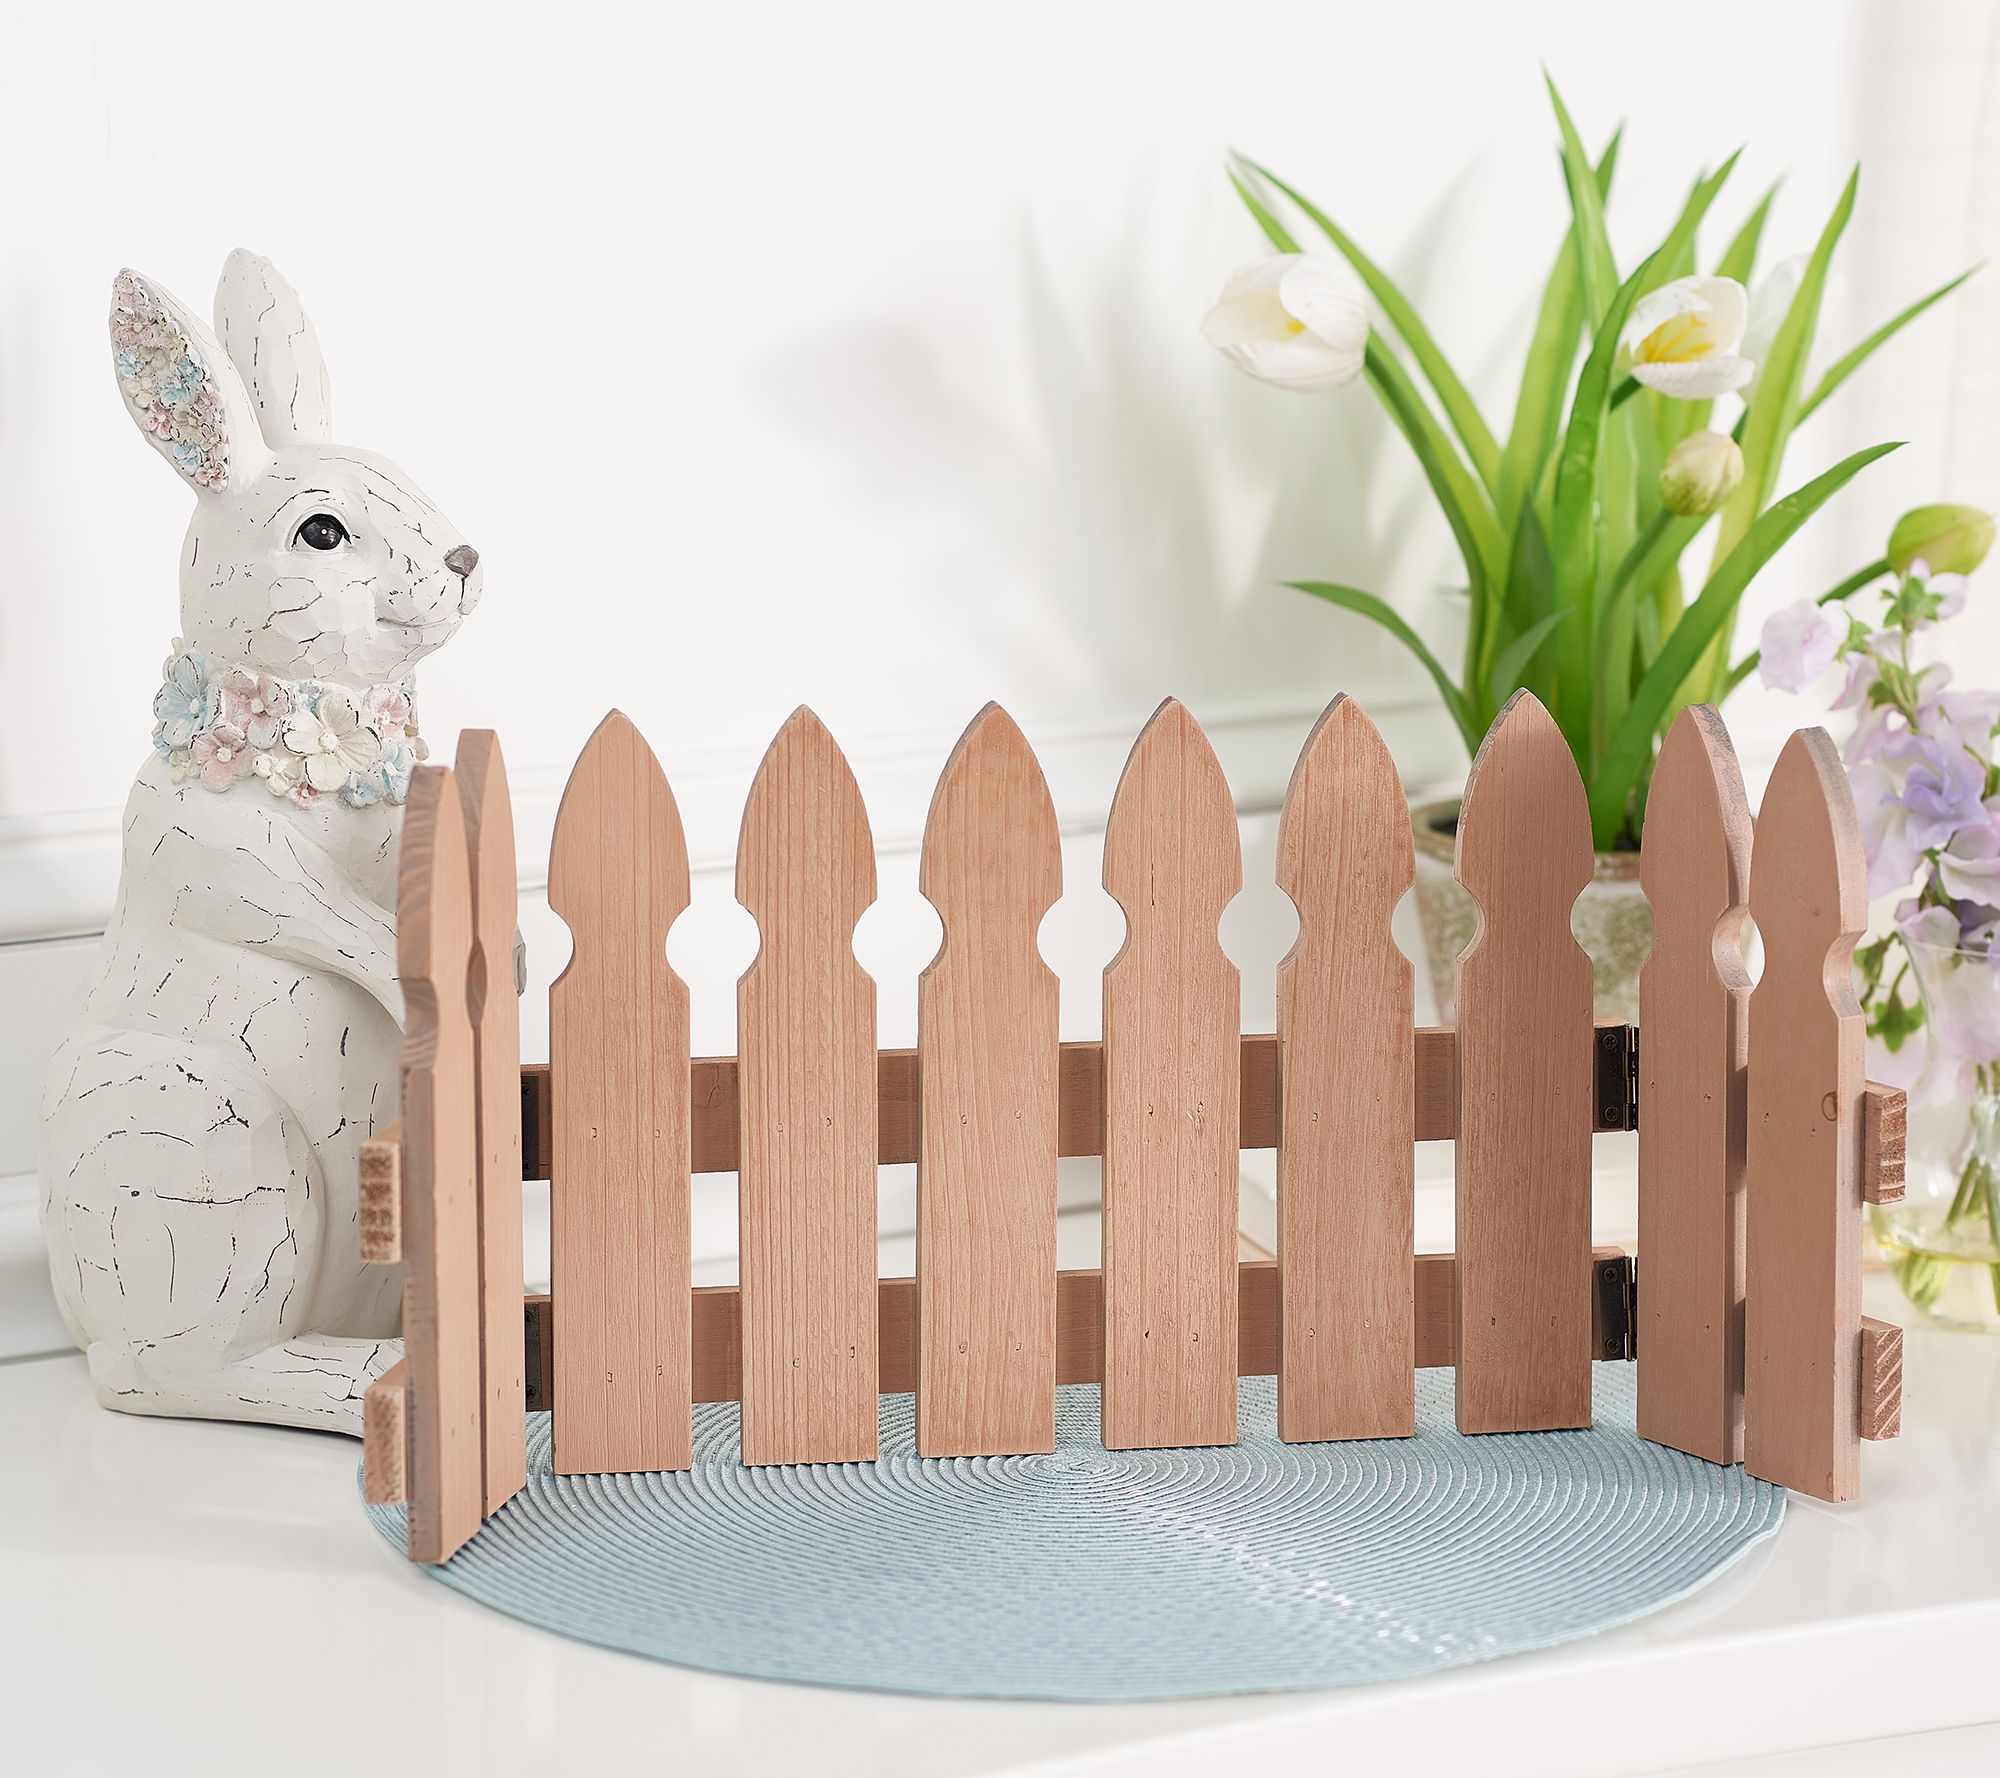 Wooden Picket Fence Folding Accent Display by Valerie